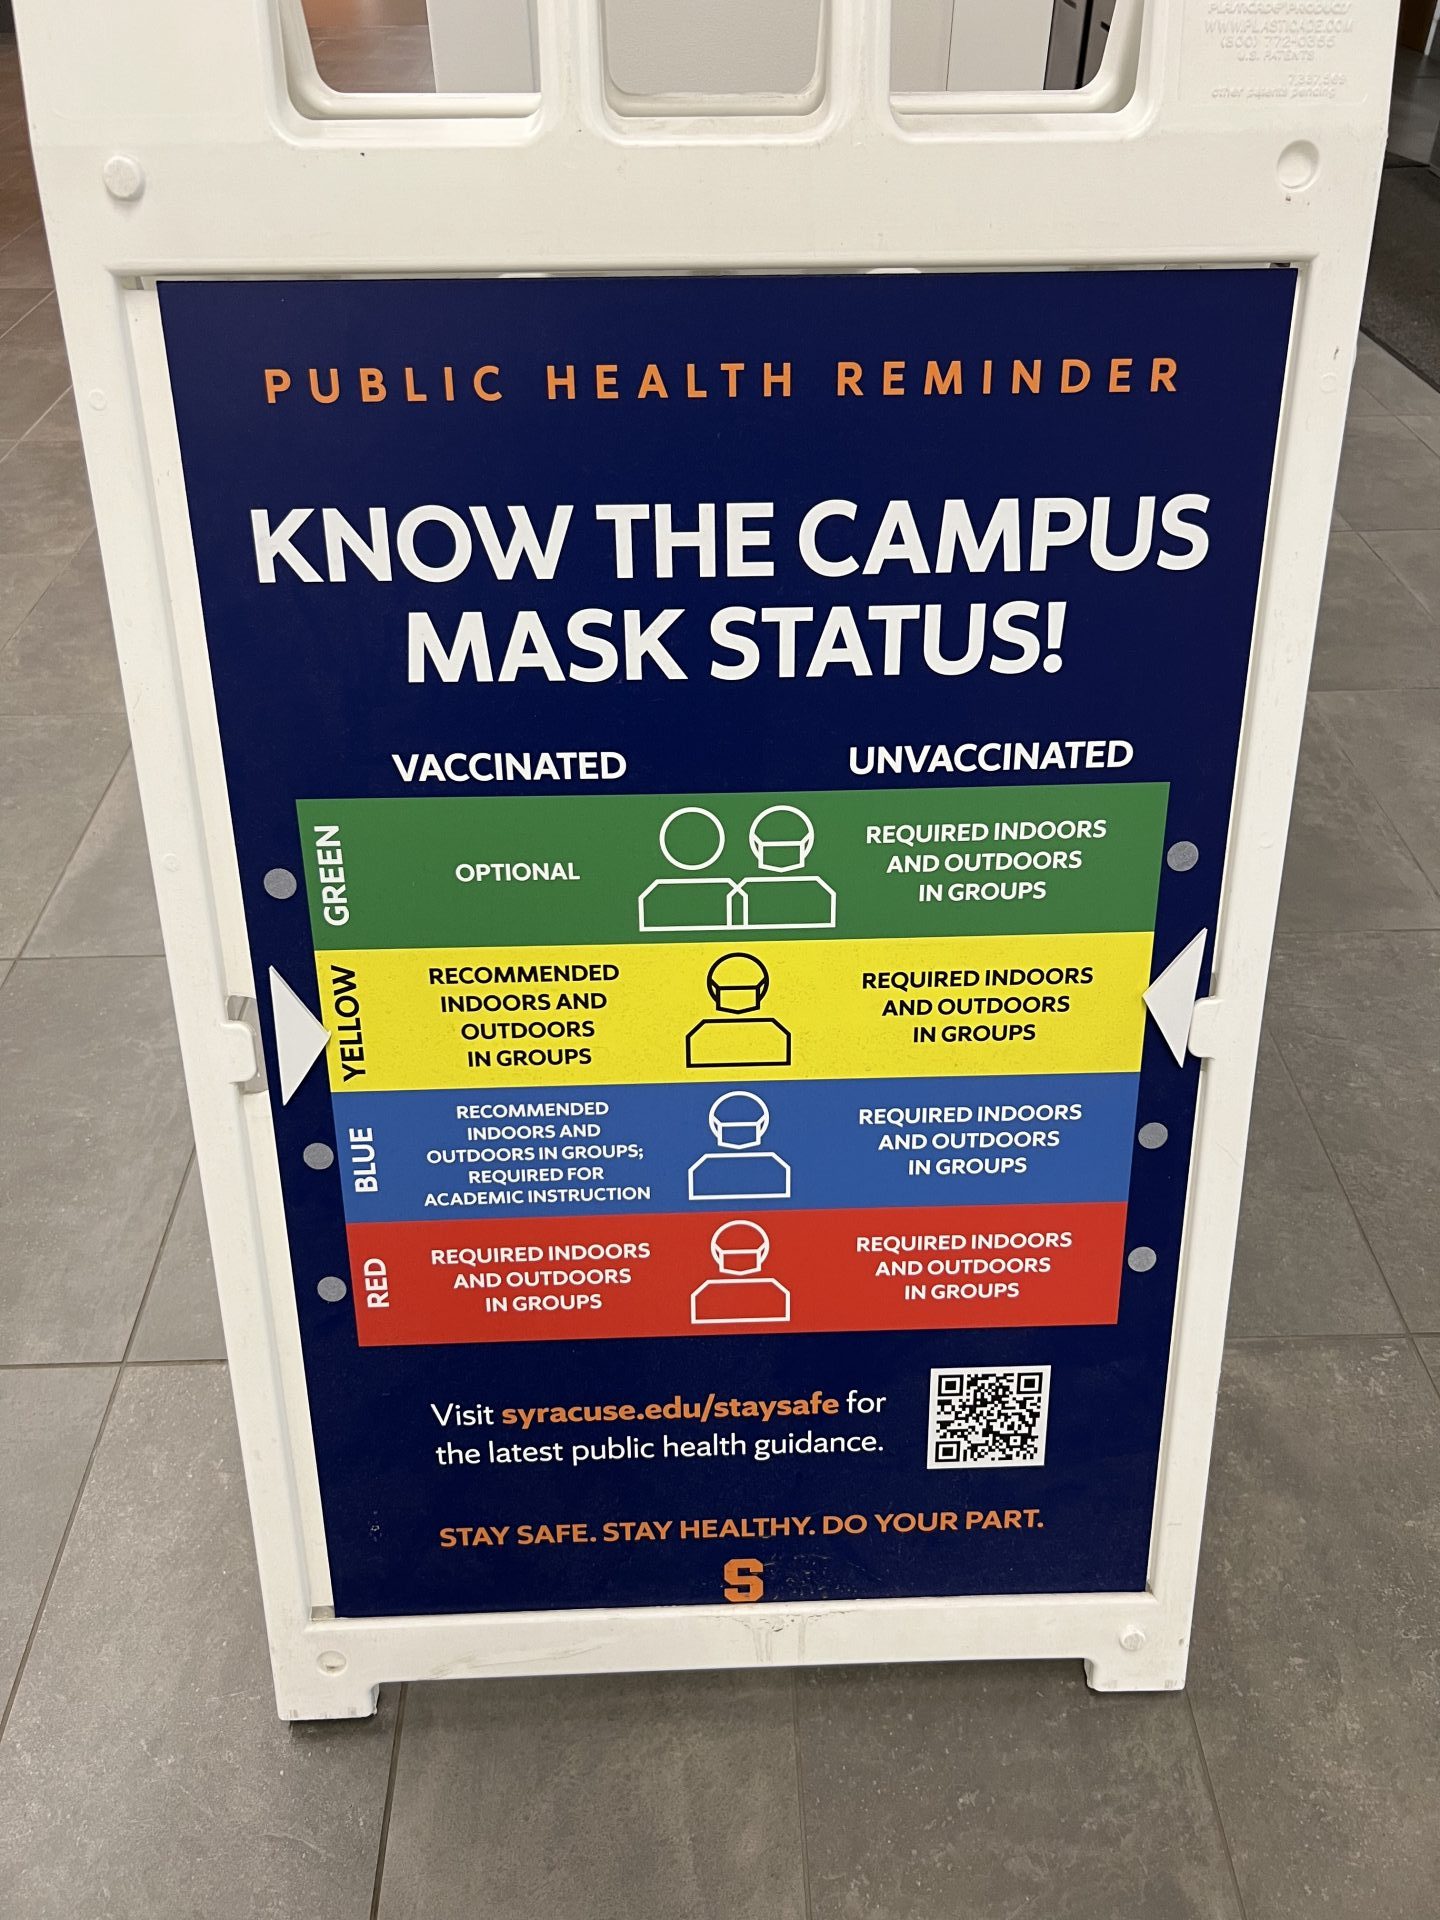 A sign depicts the color-coded mask status at Syracuse.